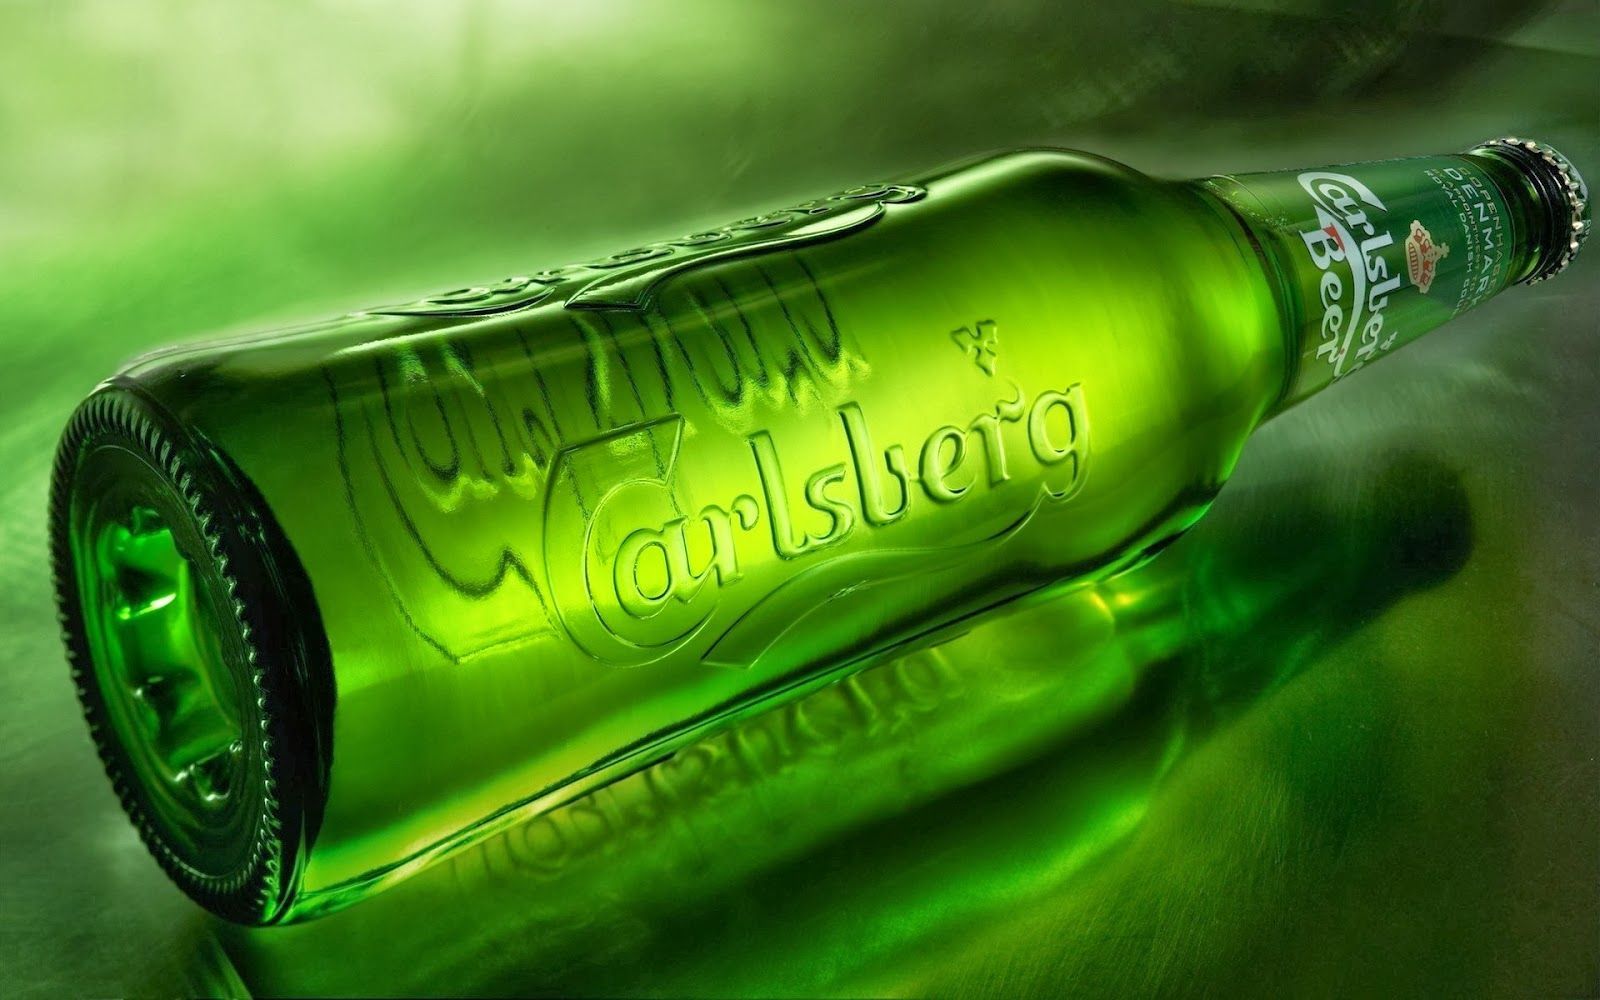 Android Full 1080p Wallpapers - Carlsberg Beer Hd , HD Wallpaper & Backgrounds